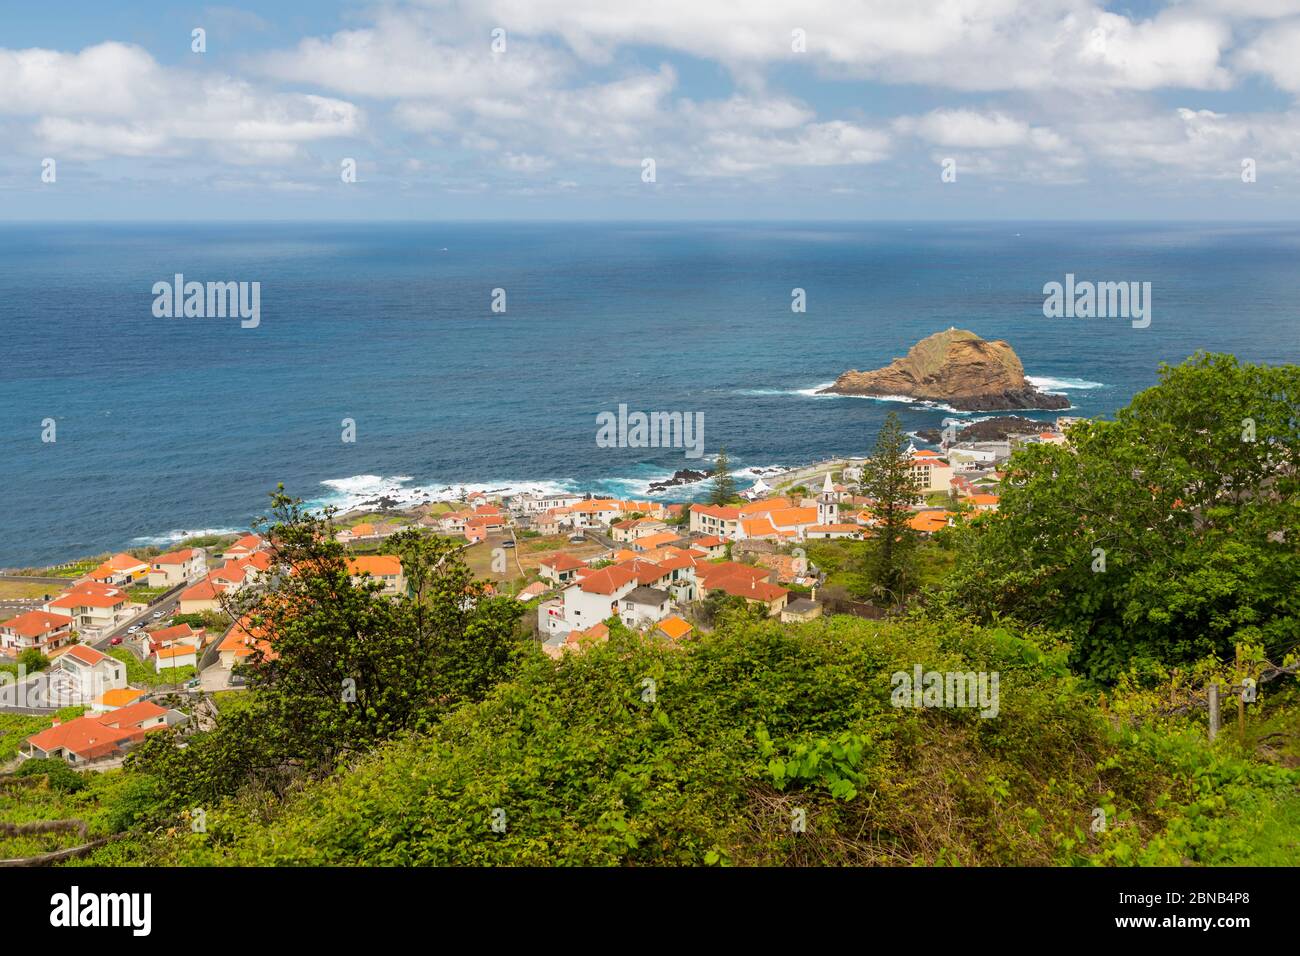 View of seaside town from elevated position, Porto Moniz, Madeira, Portugal, Europe Stock Photo